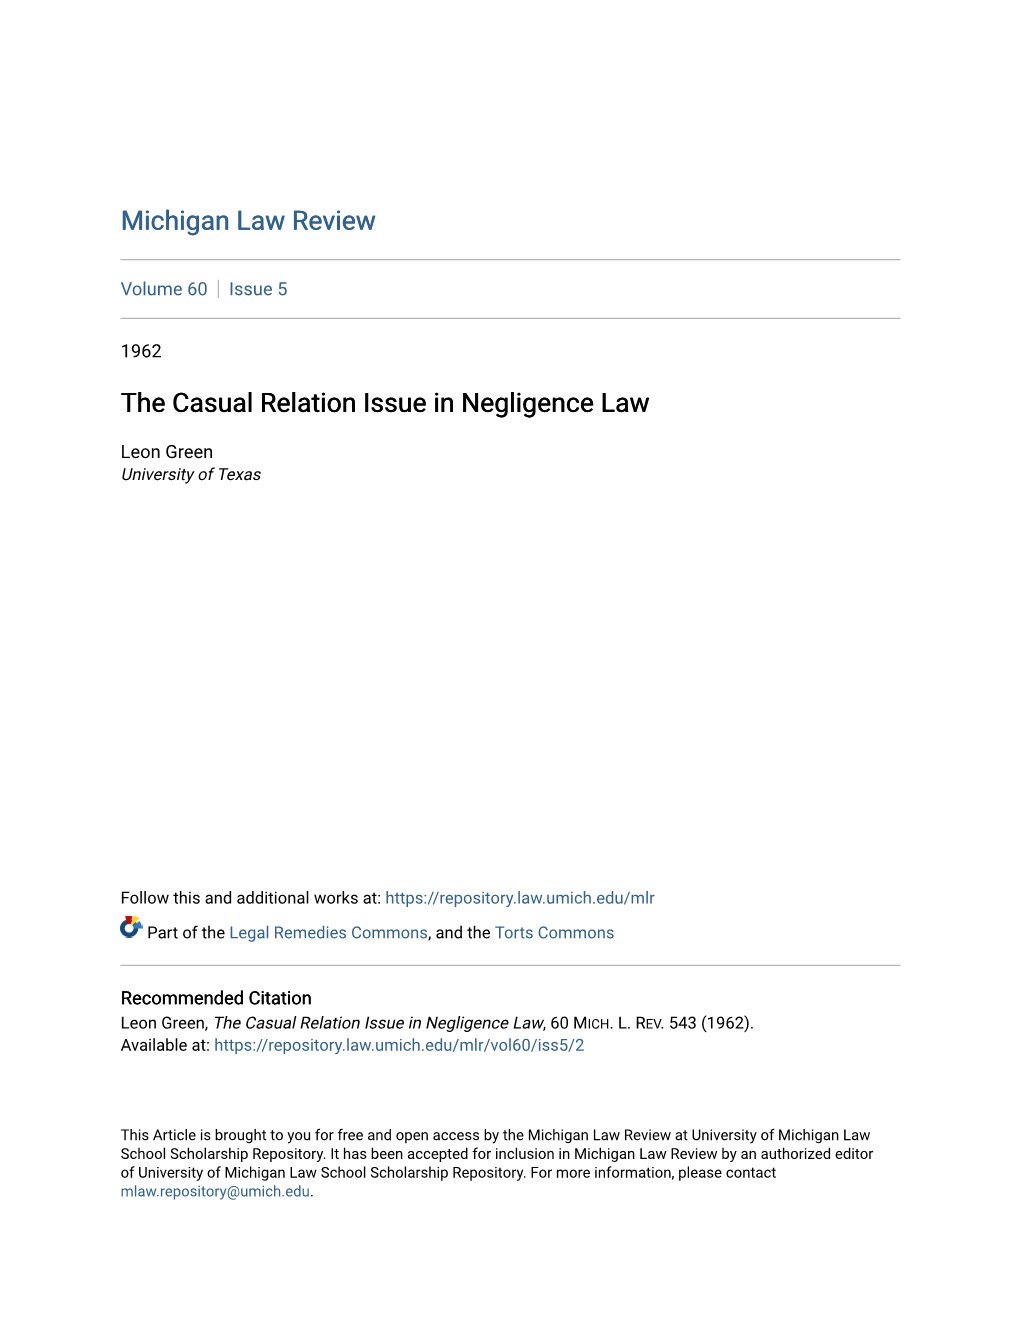 The Casual Relation Issue in Negligence Law